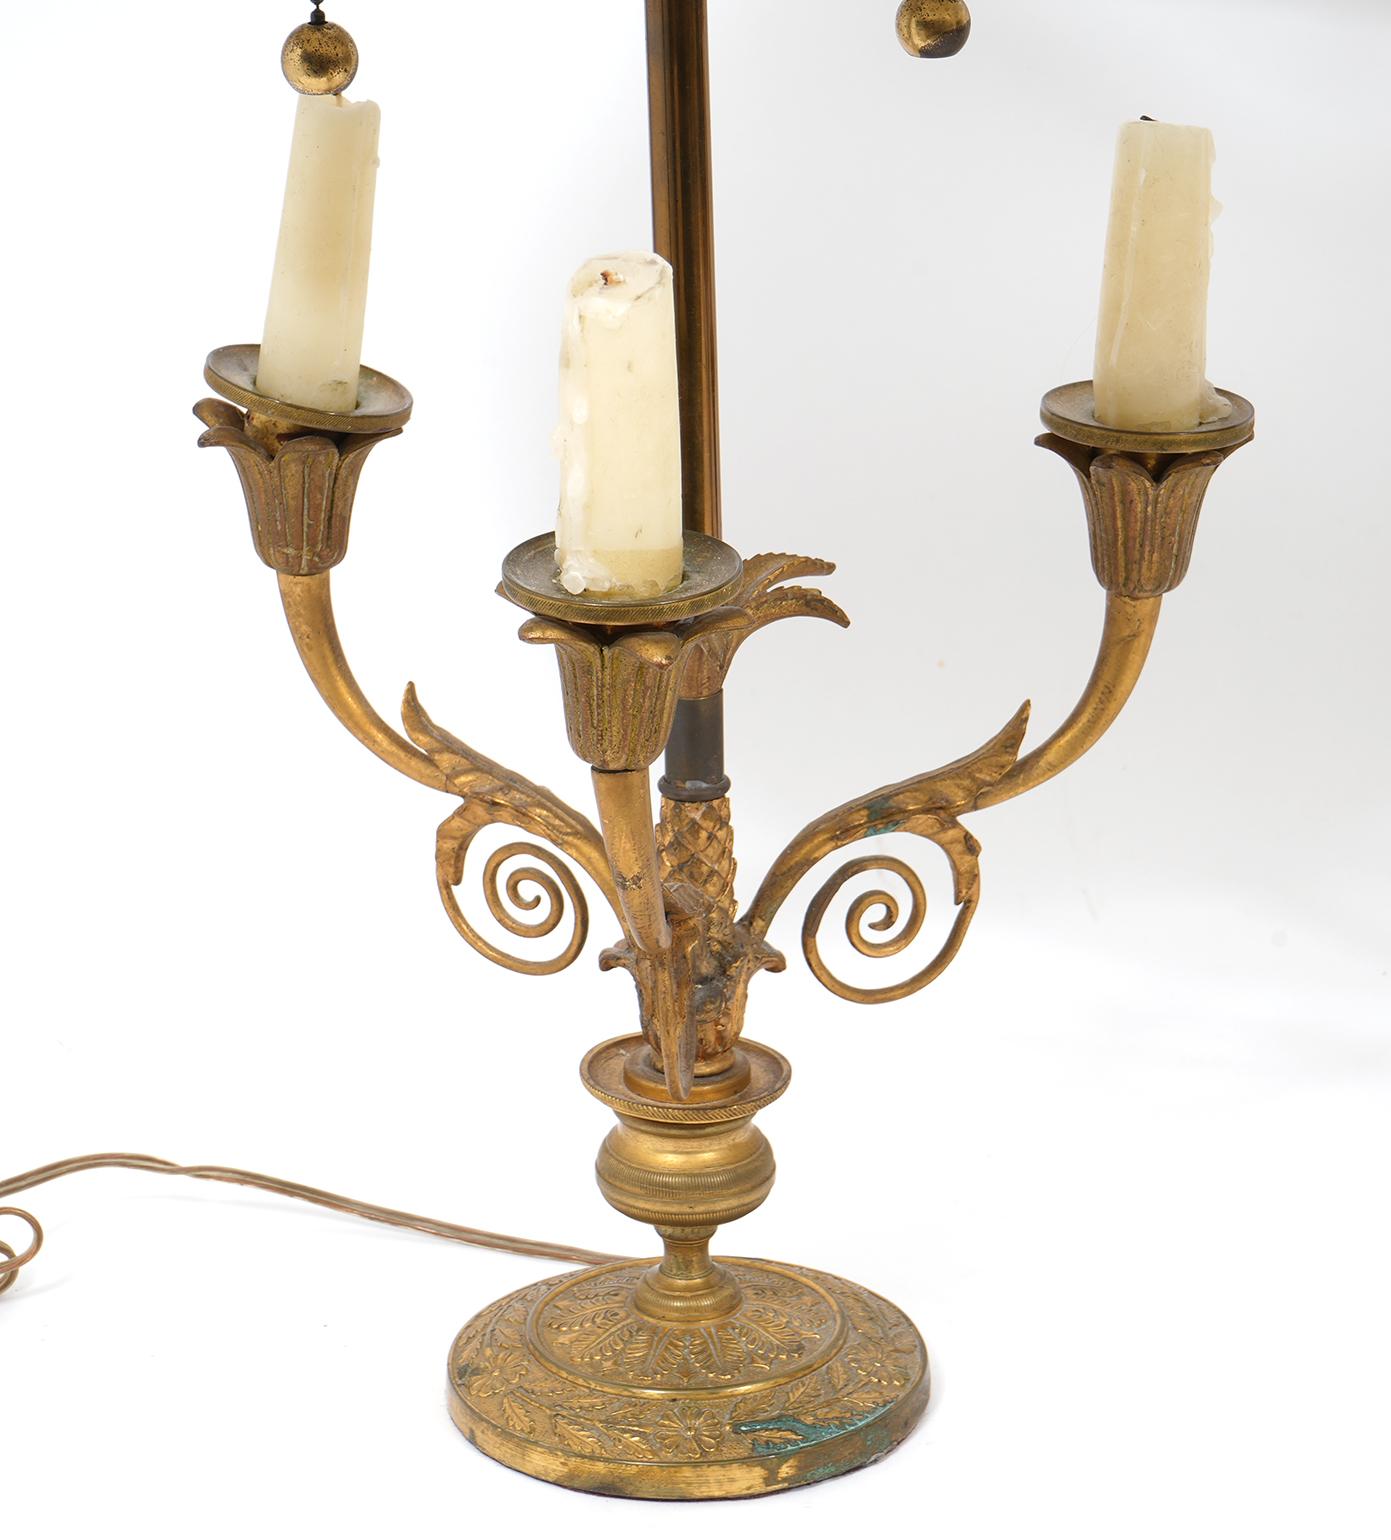 Pair of nicely detailed bronze lamps. French, early 20th century. Painted tole shades adjust up and down. Newly rewired.